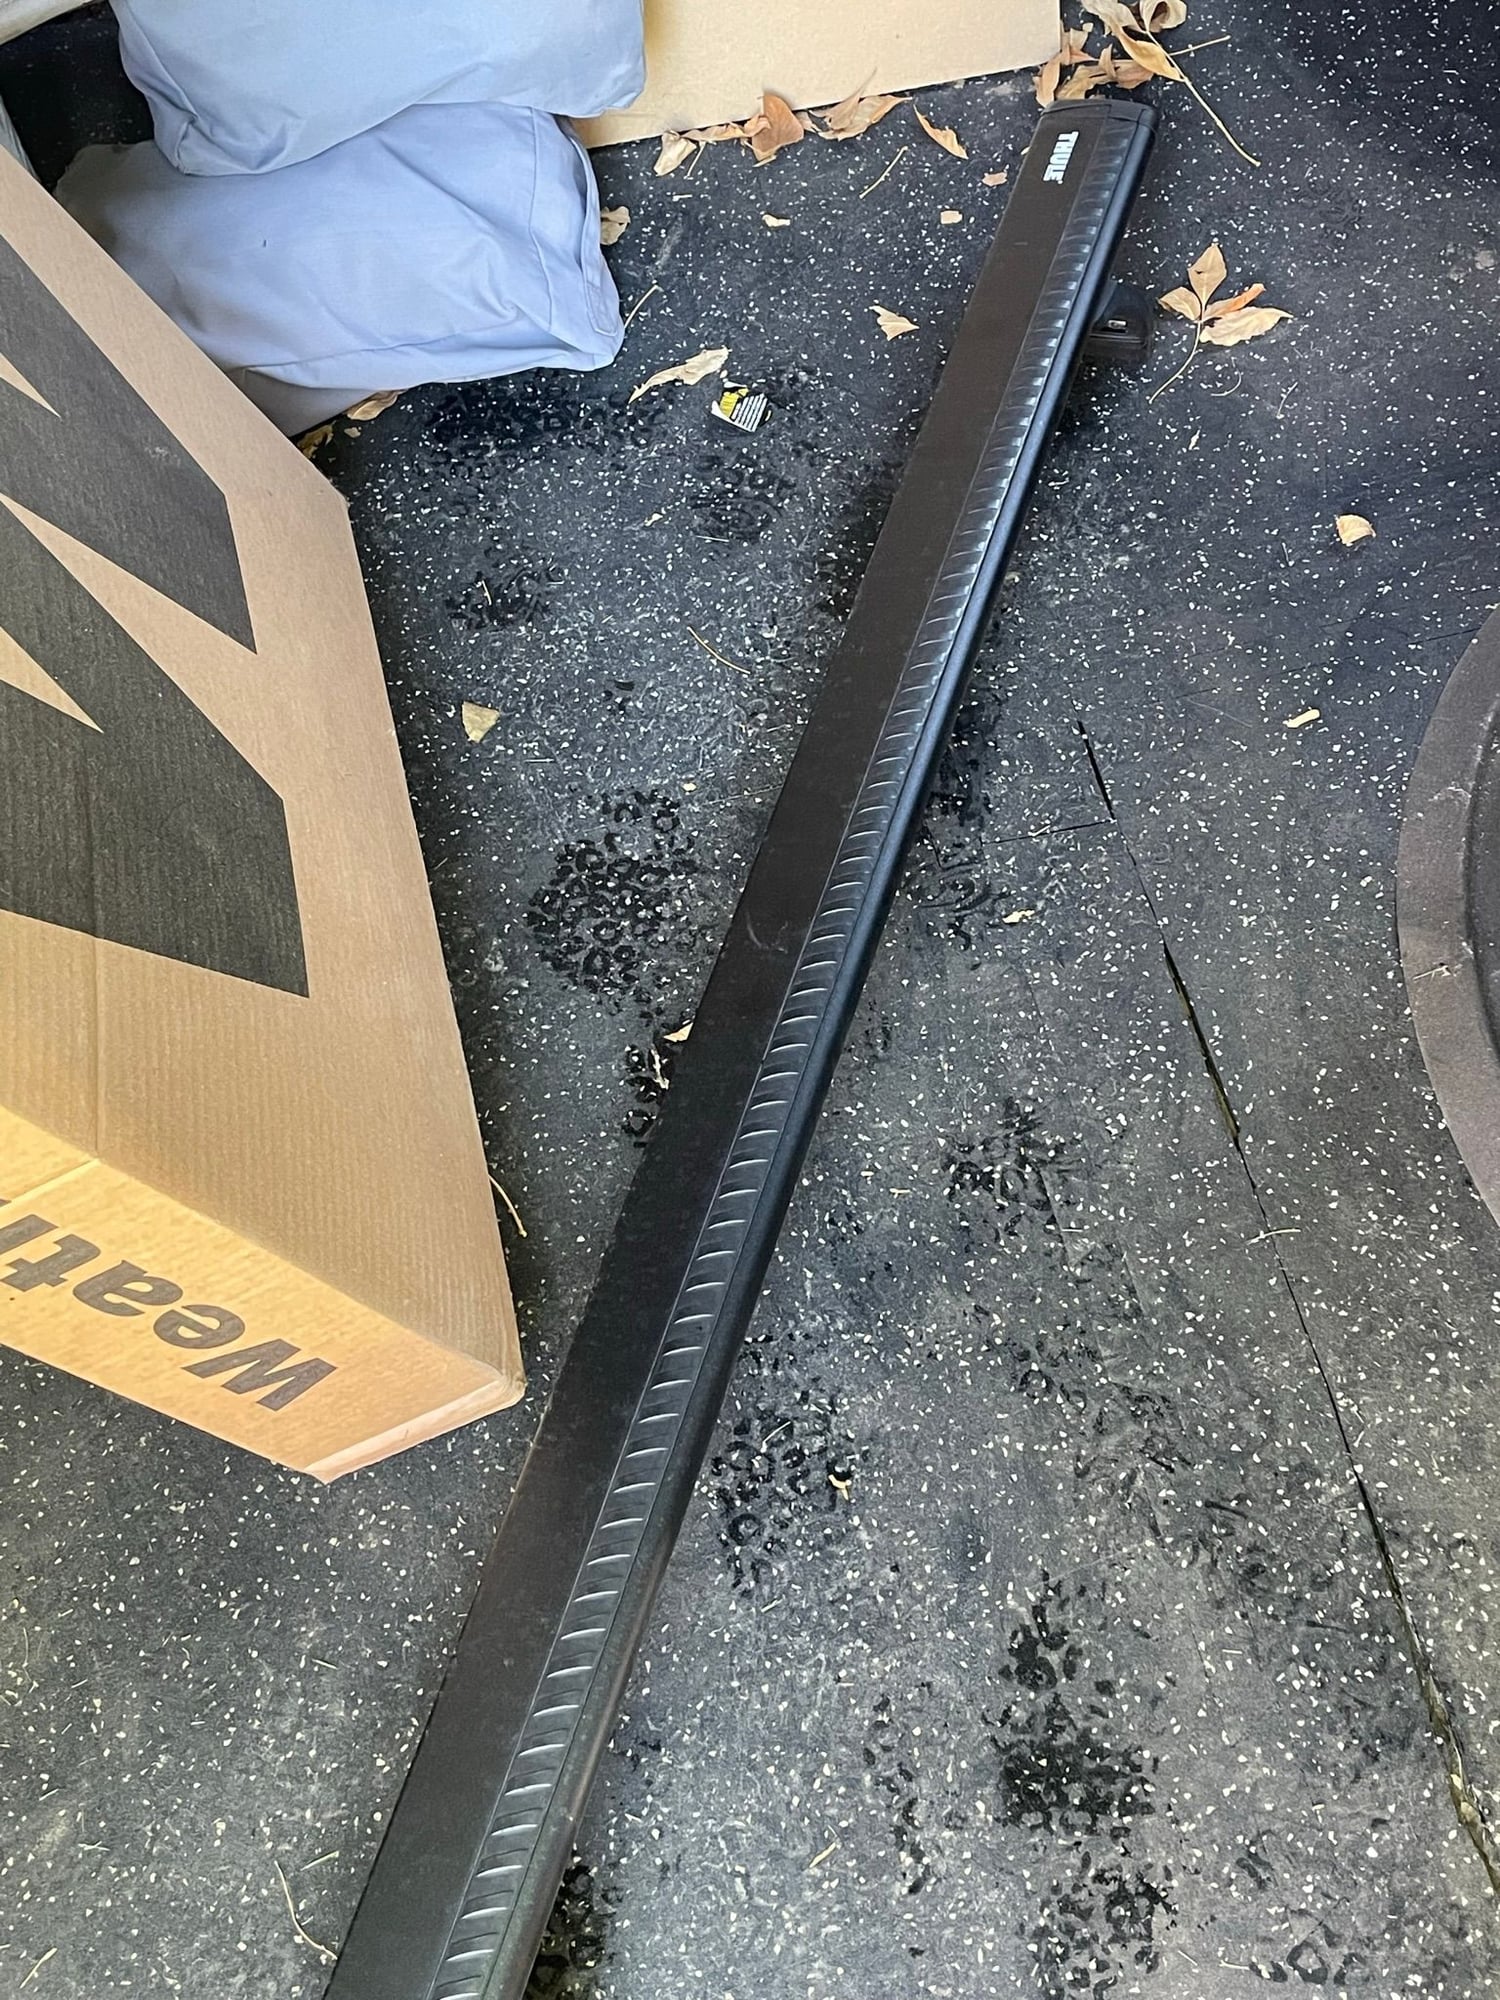 Accessories - Thule Roof Rack System and Thule Cargo Box - Used - 2018 to 2023 Audi Q7 - Denver, CO 80209, United States